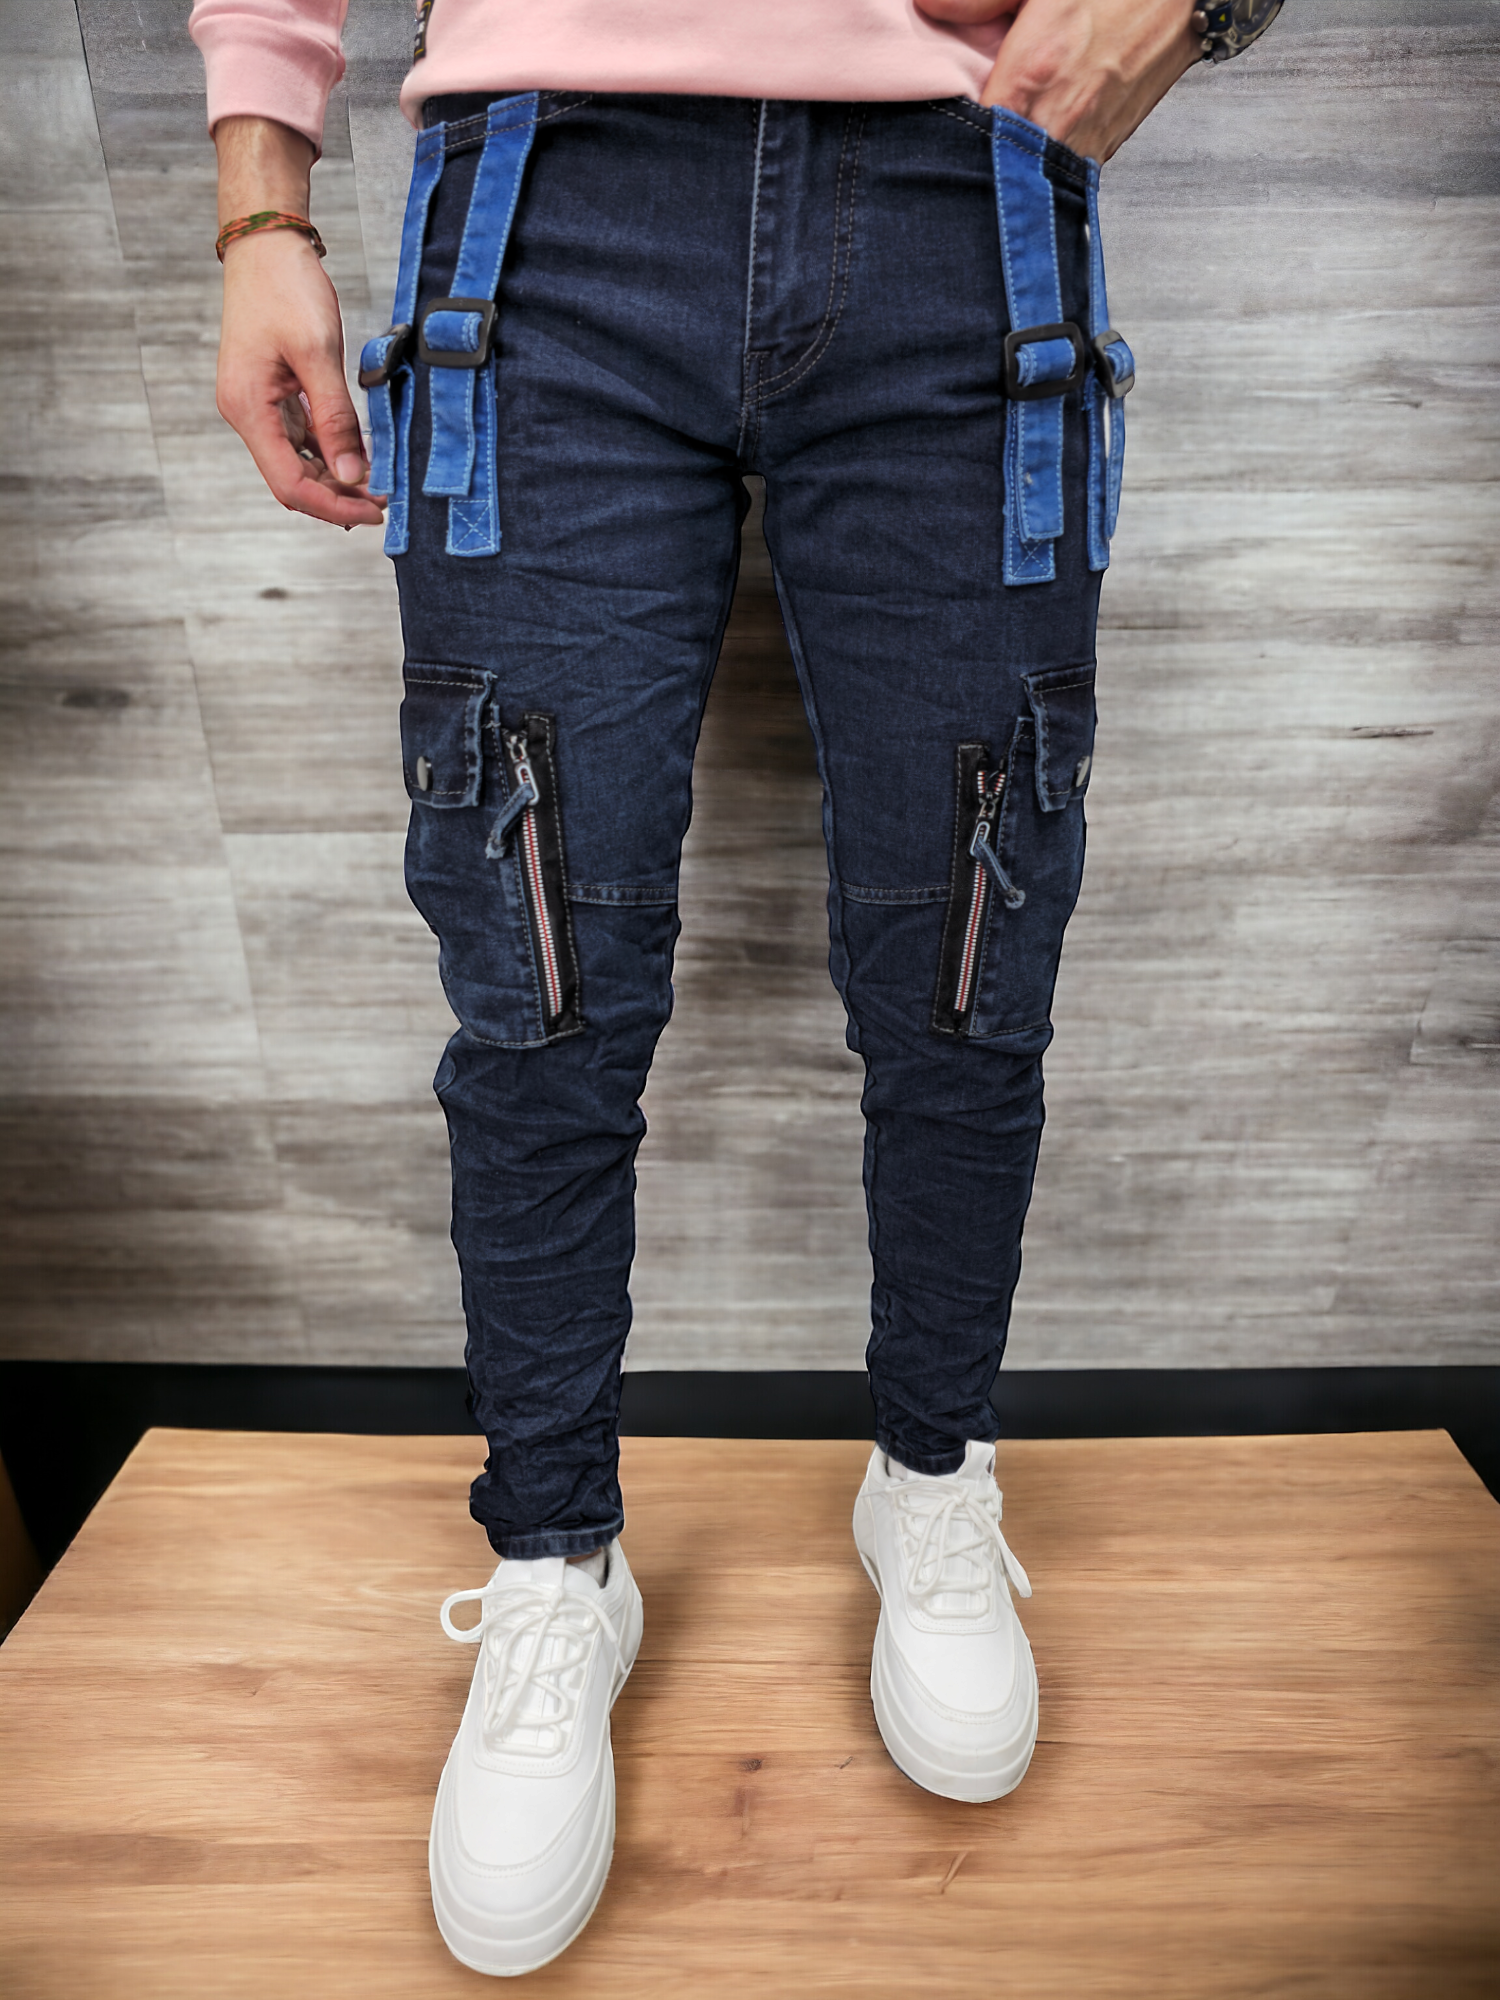 Buy Hymen Legions 6 Pocket Regular Fit Cotton Cargo Jogger Pants for Men.  Design for Casual and Sporty Looks. (OFF-WHITE28) at Amazon.in